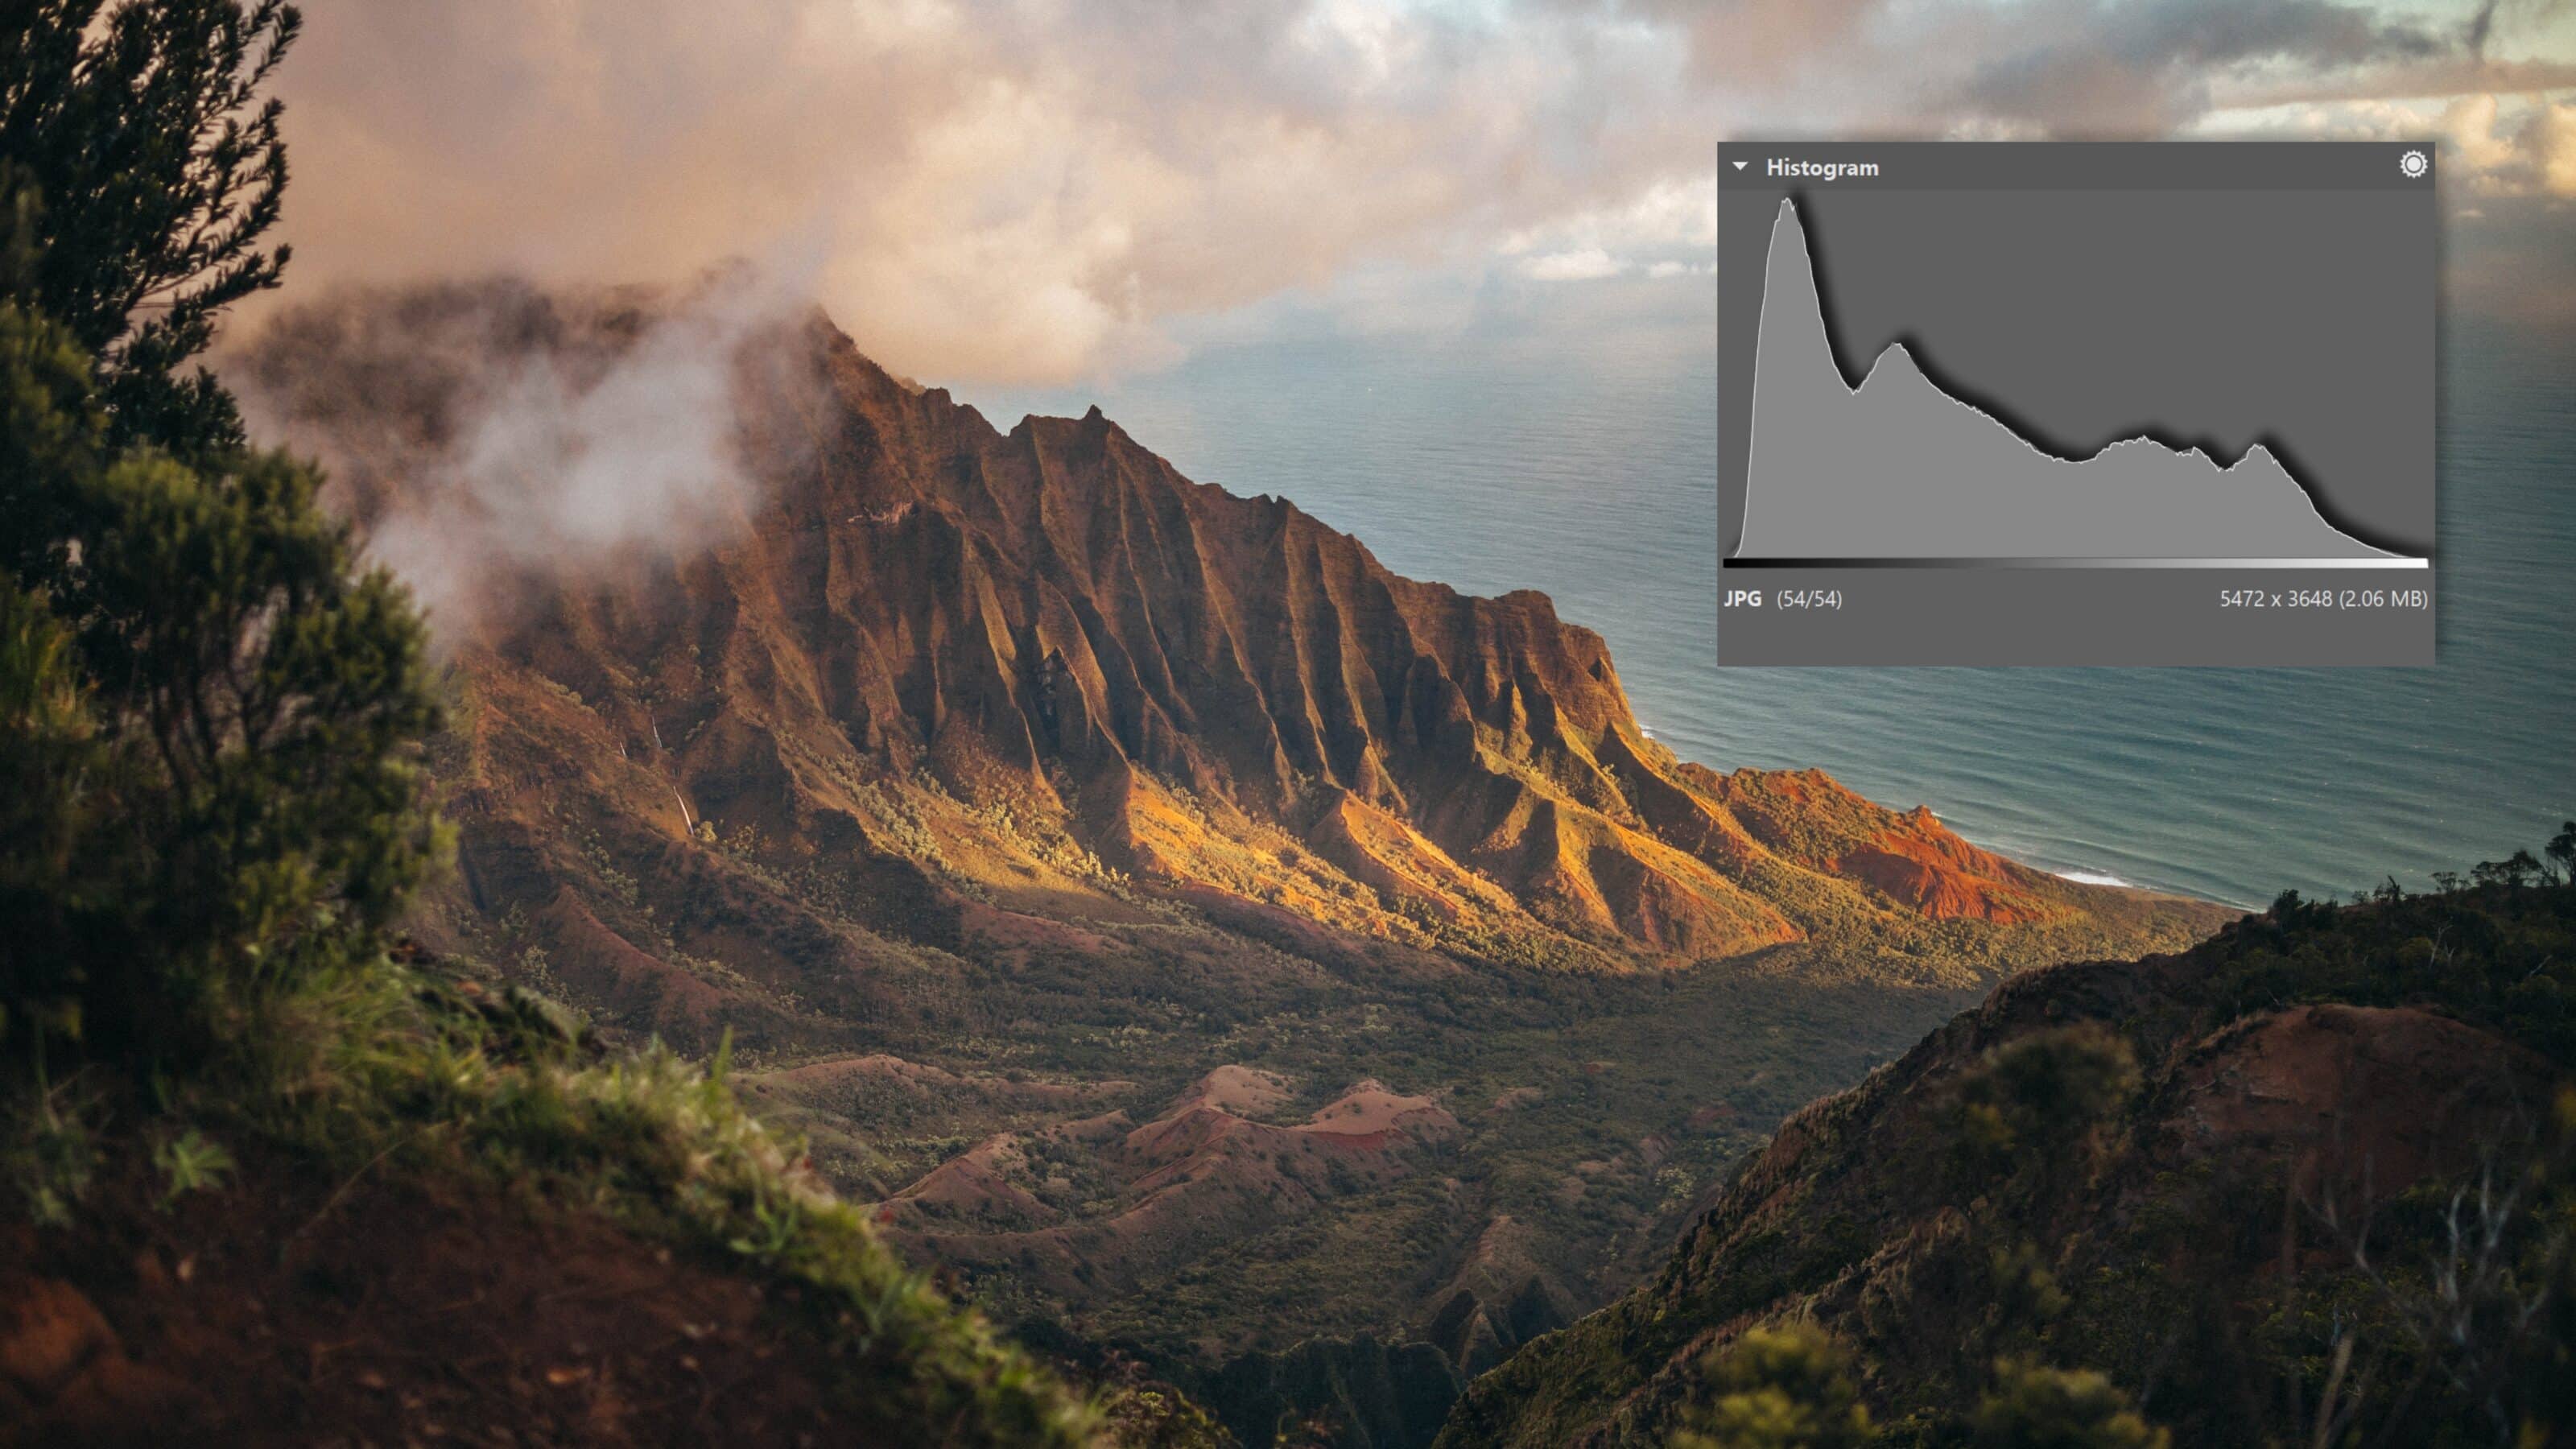 How to Read a Histogram